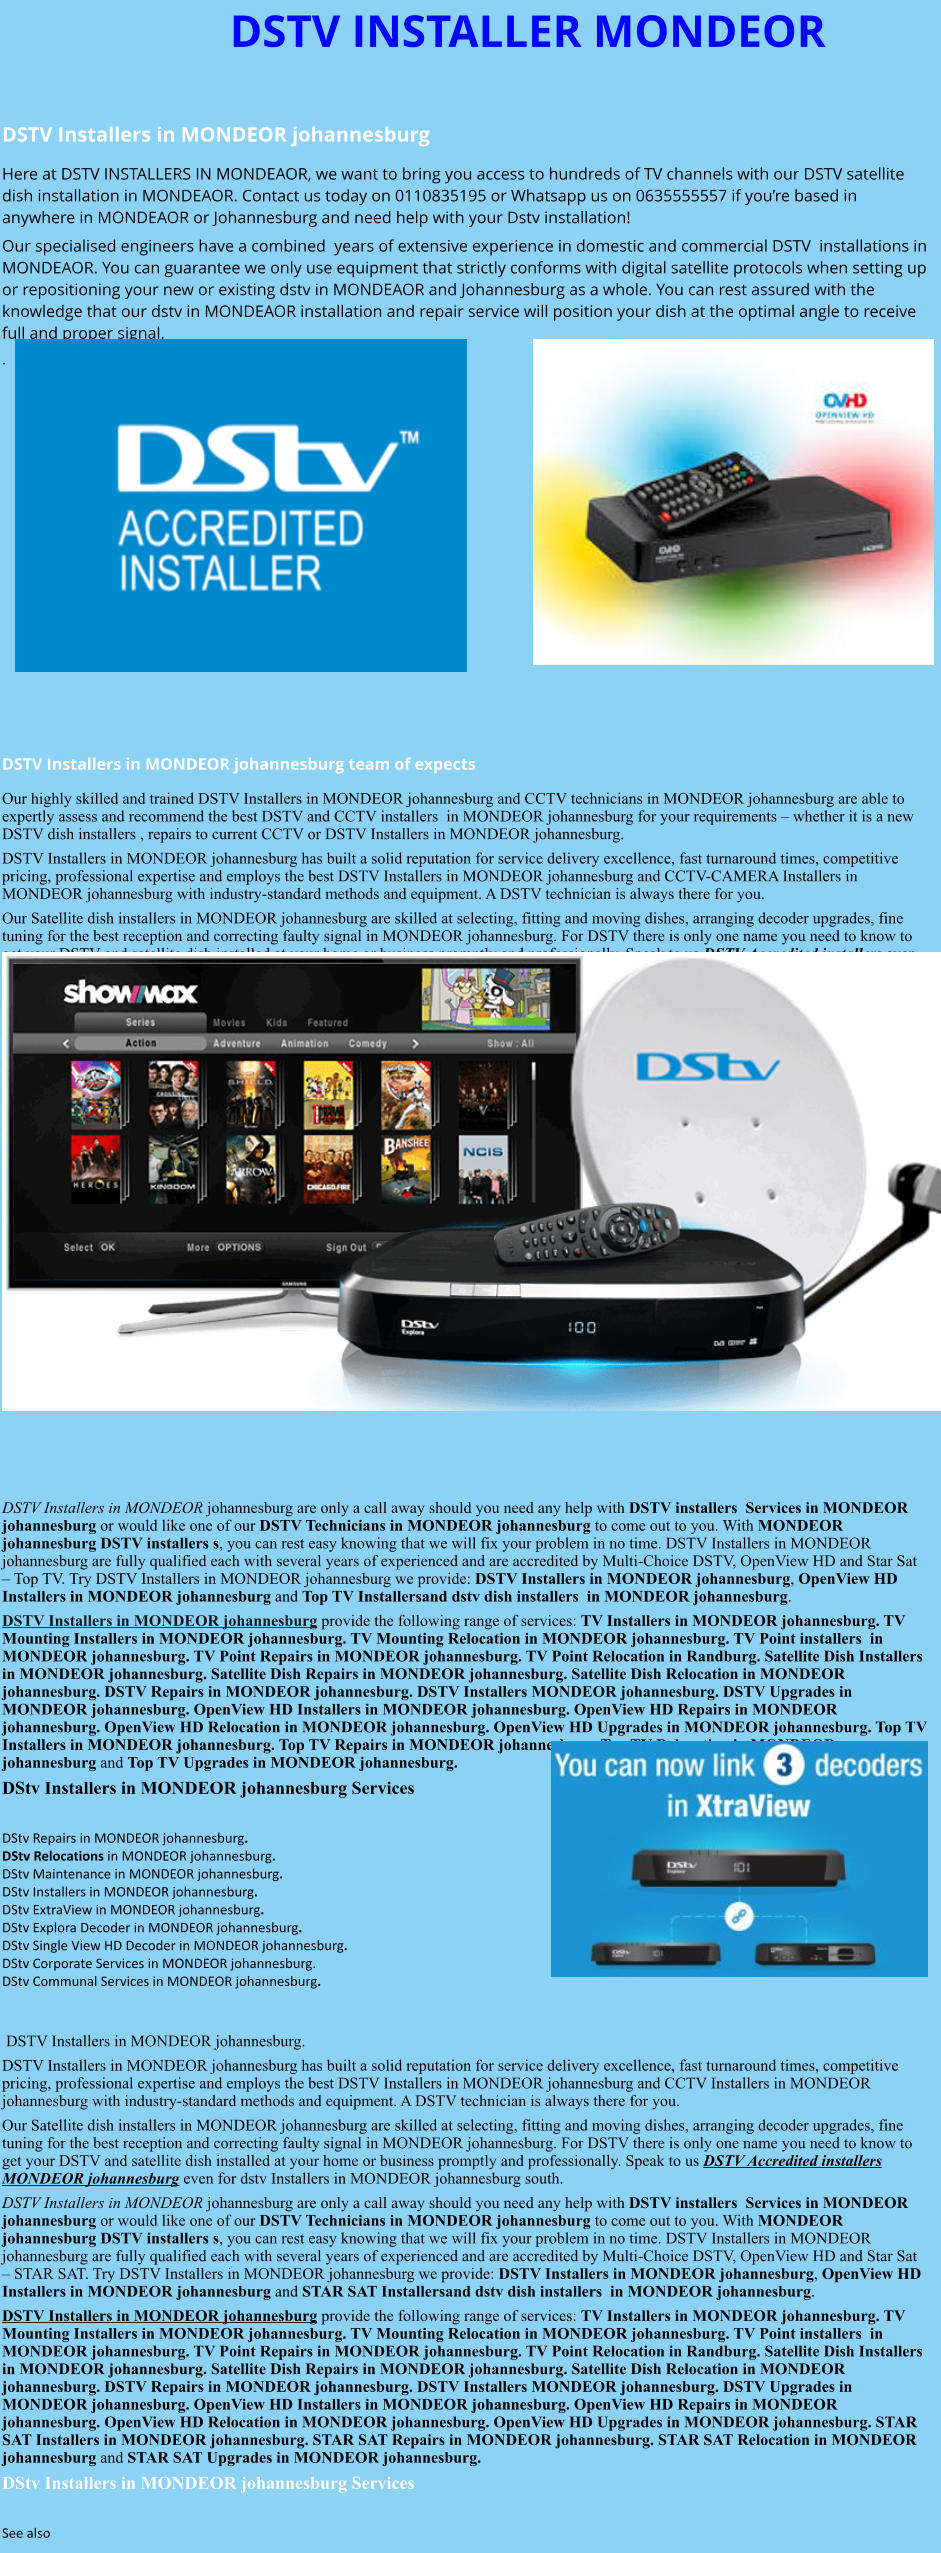 DSTV INSTALLER MONDEOR  DSTV Installers in MONDEOR johannesburg  Here at DSTV INSTALLERS IN MONDEAOR, we want to bring you access to hundreds of TV channels with our DSTV satellite dish installation in MONDEAOR. Contact us today on 0110835195 or Whatsapp us on 0635555557 if you’re based in anywhere in MONDEAOR or Johannesburg and need help with your Dstv installation! Our specialised engineers have a combined  years of extensive experience in domestic and commercial DSTV  installations in MONDEAOR. You can guarantee we only use equipment that strictly conforms with digital satellite protocols when setting up or repositioning your new or existing dstv in MONDEAOR and Johannesburg as a whole. You can rest assured with the knowledge that our dstv in MONDEAOR installation and repair service will position your dish at the optimal angle to receive full and proper signal. .                DSTV Installers in MONDEOR johannesburg team of expects Our highly skilled and trained DSTV Installers in MONDEOR johannesburg and CCTV technicians in MONDEOR johannesburg are able to expertly assess and recommend the best DSTV and CCTV installers  in MONDEOR johannesburg for your requirements – whether it is a new DSTV dish installers , repairs to current CCTV or DSTV Installers in MONDEOR johannesburg. DSTV Installers in MONDEOR johannesburg has built a solid reputation for service delivery excellence, fast turnaround times, competitive pricing, professional expertise and employs the best DSTV Installers in MONDEOR johannesburg and CCTV-CAMERA Installers in MONDEOR johannesburg with industry-standard methods and equipment. A DSTV technician is always there for you. Our Satellite dish installers in MONDEOR johannesburg are skilled at selecting, fitting and moving dishes, arranging decoder upgrades, fine tuning for the best reception and correcting faulty signal in MONDEOR johannesburg. For DSTV there is only one name you need to know to get your DSTV and satellite dish installed at your home or business promptly and professionally. Speak to us DSTV Accredited installers even for dstv Installers in MONDEOR johannesburg south.                      DSTV Installers in MONDEOR johannesburg are only a call away should you need any help with DSTV installers  Services in MONDEOR johannesburg or would like one of our DSTV Technicians in MONDEOR johannesburg to come out to you. With MONDEOR johannesburg DSTV installers s, you can rest easy knowing that we will fix your problem in no time. DSTV Installers in MONDEOR johannesburg are fully qualified each with several years of experienced and are accredited by Multi-Choice DSTV, OpenView HD and Star Sat – Top TV. Try DSTV Installers in MONDEOR johannesburg we provide: DSTV Installers in MONDEOR johannesburg, OpenView HD Installers in MONDEOR johannesburg and Top TV Installersand dstv dish installers  in MONDEOR johannesburg. DSTV Installers in MONDEOR johannesburg provide the following range of services: TV Installers in MONDEOR johannesburg. TV Mounting Installers in MONDEOR johannesburg. TV Mounting Relocation in MONDEOR johannesburg. TV Point installers  in MONDEOR johannesburg. TV Point Repairs in MONDEOR johannesburg. TV Point Relocation in Randburg. Satellite Dish Installers in MONDEOR johannesburg. Satellite Dish Repairs in MONDEOR johannesburg. Satellite Dish Relocation in MONDEOR johannesburg. DSTV Repairs in MONDEOR johannesburg. DSTV Installers MONDEOR johannesburg. DSTV Upgrades in MONDEOR johannesburg. OpenView HD Installers in MONDEOR johannesburg. OpenView HD Repairs in MONDEOR johannesburg. OpenView HD Relocation in MONDEOR johannesburg. OpenView HD Upgrades in MONDEOR johannesburg. Top TV Installers in MONDEOR johannesburg. Top TV Repairs in MONDEOR johannesburg. Top TV Relocation in MONDEOR johannesburg and Top TV Upgrades in MONDEOR johannesburg. DStv Installers in MONDEOR johannesburg Services  DStv Repairs in MONDEOR johannesburg.  DStv Relocations in MONDEOR johannesburg.  DStv Maintenance in MONDEOR johannesburg. DStv Installers in MONDEOR johannesburg. DStv ExtraView in MONDEOR johannesburg. DStv Explora Decoder in MONDEOR johannesburg. DStv Single View HD Decoder in MONDEOR johannesburg. DStv Corporate Services in MONDEOR johannesburg. DStv Communal Services in MONDEOR johannesburg.    DSTV Installers in MONDEOR johannesburg. DSTV Installers in MONDEOR johannesburg has built a solid reputation for service delivery excellence, fast turnaround times, competitive pricing, professional expertise and employs the best DSTV Installers in MONDEOR johannesburg and CCTV Installers in MONDEOR johannesburg with industry-standard methods and equipment. A DSTV technician is always there for you. Our Satellite dish installers in MONDEOR johannesburg are skilled at selecting, fitting and moving dishes, arranging decoder upgrades, fine tuning for the best reception and correcting faulty signal in MONDEOR johannesburg. For DSTV there is only one name you need to know to get your DSTV and satellite dish installed at your home or business promptly and professionally. Speak to us DSTV Accredited installers MONDEOR johannesburg even for dstv Installers in MONDEOR johannesburg south. DSTV Installers in MONDEOR johannesburg are only a call away should you need any help with DSTV installers  Services in MONDEOR johannesburg or would like one of our DSTV Technicians in MONDEOR johannesburg to come out to you. With MONDEOR johannesburg DSTV installers s, you can rest easy knowing that we will fix your problem in no time. DSTV Installers in MONDEOR johannesburg are fully qualified each with several years of experienced and are accredited by Multi-Choice DSTV, OpenView HD and Star Sat – STAR SAT. Try DSTV Installers in MONDEOR johannesburg we provide: DSTV Installers in MONDEOR johannesburg, OpenView HD Installers in MONDEOR johannesburg and STAR SAT Installersand dstv dish installers  in MONDEOR johannesburg. DSTV Installers in MONDEOR johannesburg provide the following range of services: TV Installers in MONDEOR johannesburg. TV Mounting Installers in MONDEOR johannesburg. TV Mounting Relocation in MONDEOR johannesburg. TV Point installers  in MONDEOR johannesburg. TV Point Repairs in MONDEOR johannesburg. TV Point Relocation in Randburg. Satellite Dish Installers in MONDEOR johannesburg. Satellite Dish Repairs in MONDEOR johannesburg. Satellite Dish Relocation in MONDEOR johannesburg. DSTV Repairs in MONDEOR johannesburg. DSTV Installers MONDEOR johannesburg. DSTV Upgrades in MONDEOR johannesburg. OpenView HD Installers in MONDEOR johannesburg. OpenView HD Repairs in MONDEOR johannesburg. OpenView HD Relocation in MONDEOR johannesburg. OpenView HD Upgrades in MONDEOR johannesburg. STAR SAT Installers in MONDEOR johannesburg. STAR SAT Repairs in MONDEOR johannesburg. STAR SAT Relocation in MONDEOR johannesburg and STAR SAT Upgrades in MONDEOR johannesburg. DStv Installers in MONDEOR johannesburg Services  See also